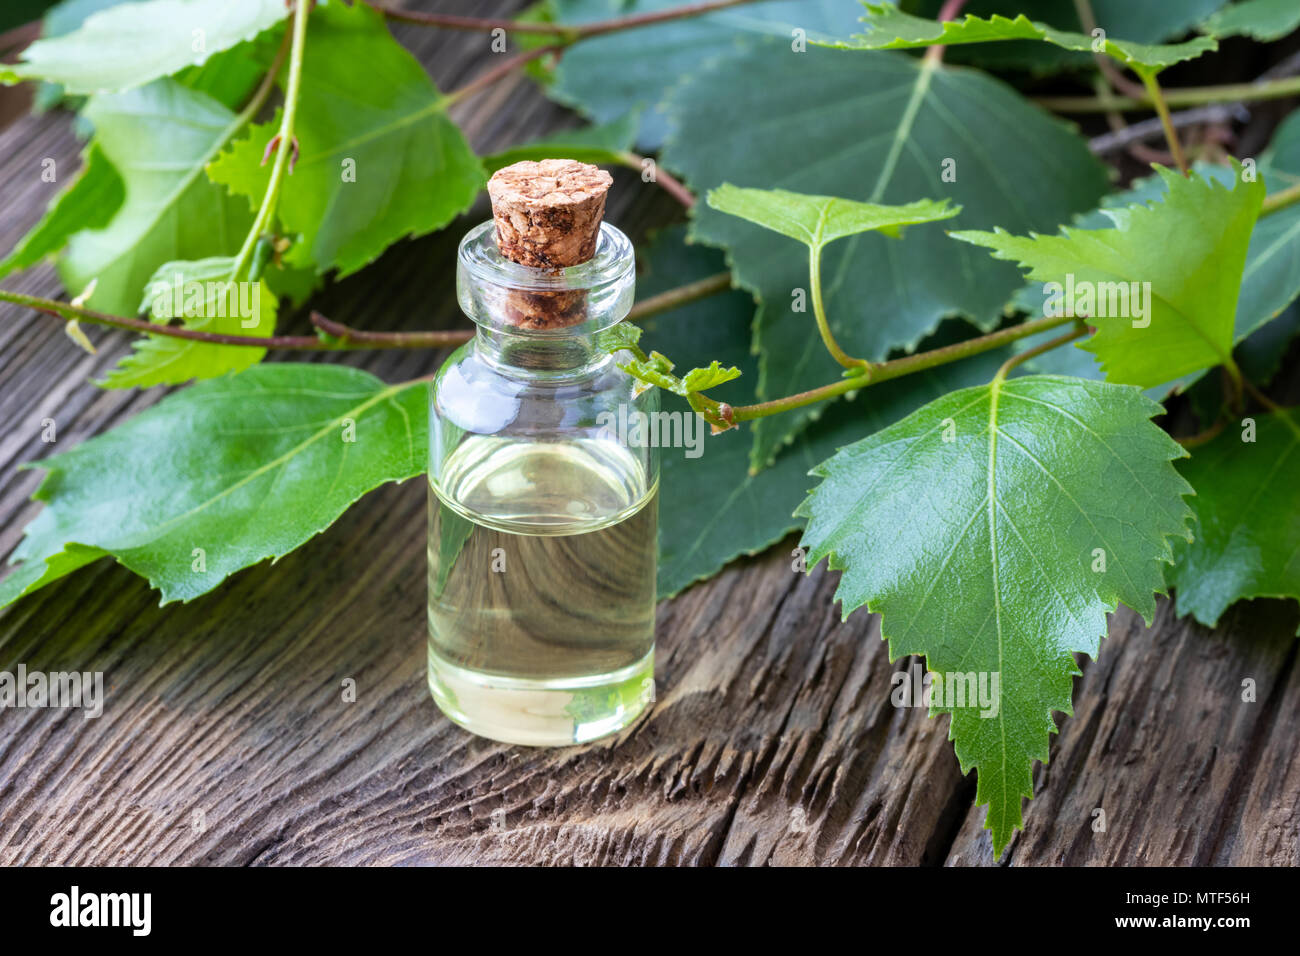 A bottle of essential oil with fresh birch branches Stock Photo